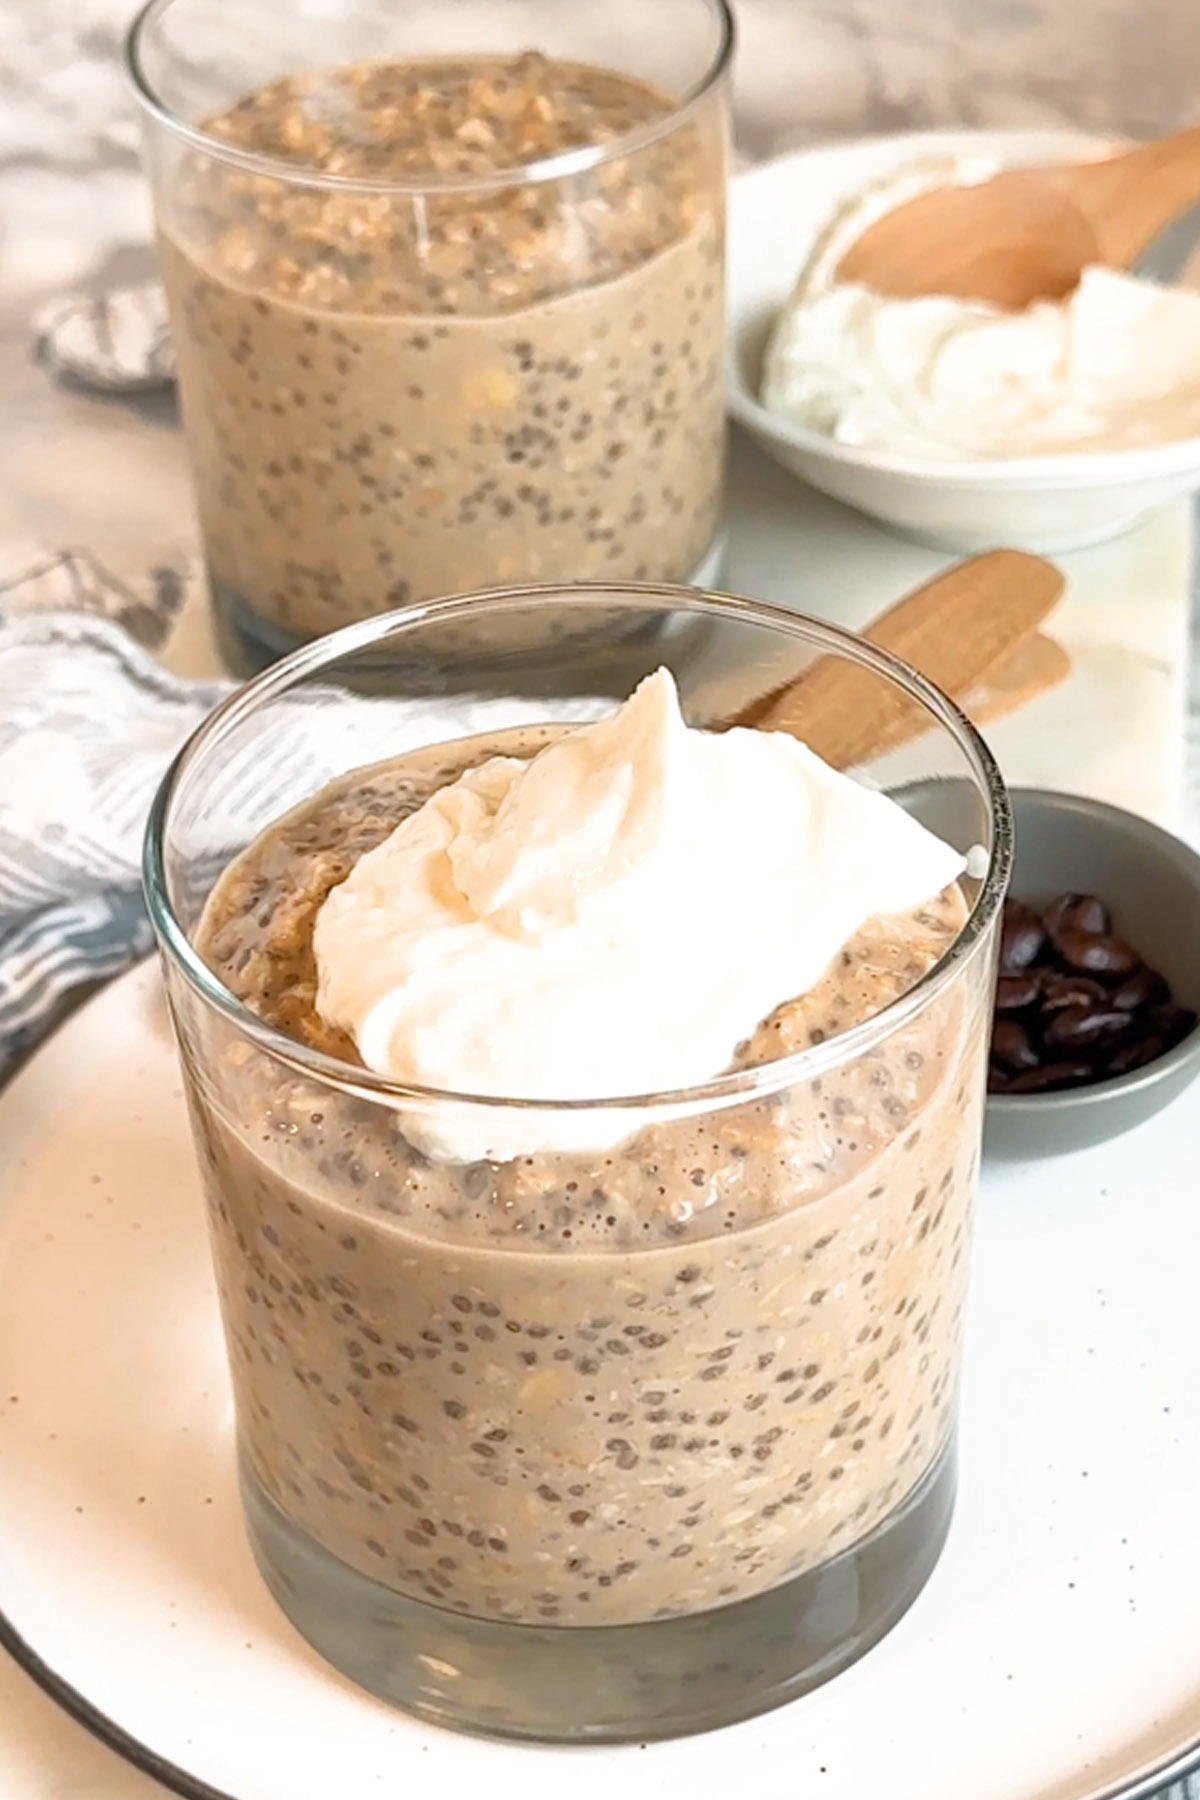 Oats in a glass with a cream cheese topping.